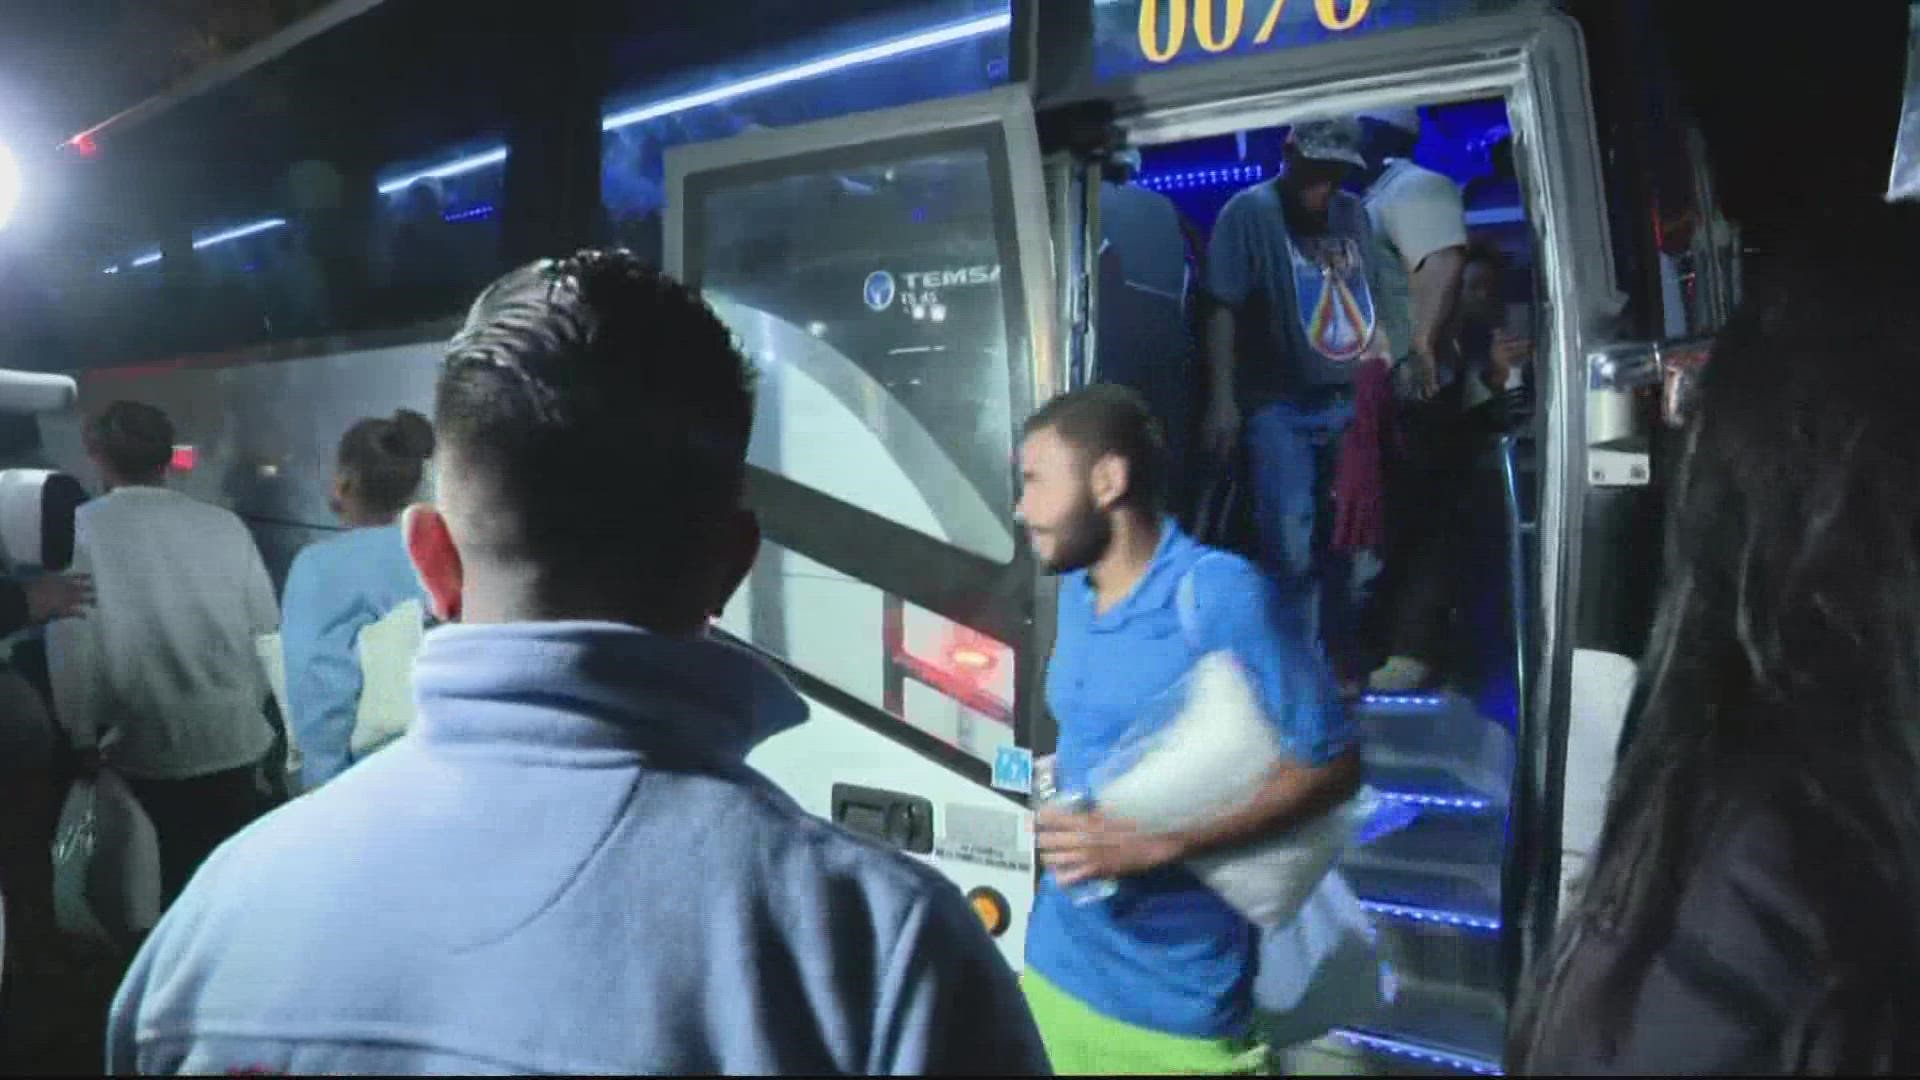 Texas has bused more than 82 hundred since the beginning of April. The governor of Texas wants to send a message to the federal government by sending asylum seekers.